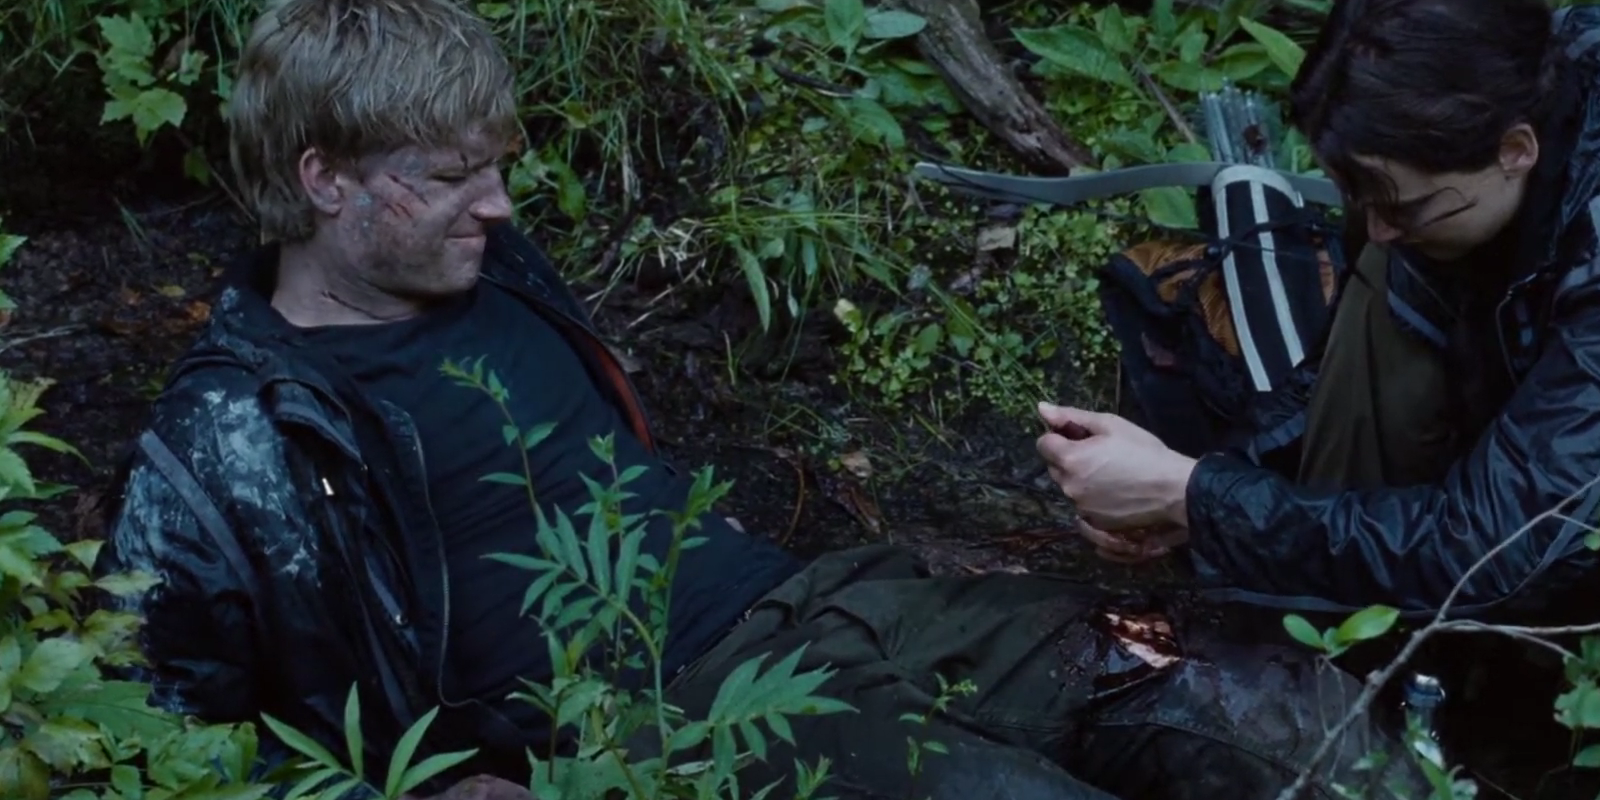 The Hunger Games - Katniss and Peeta in the Forest